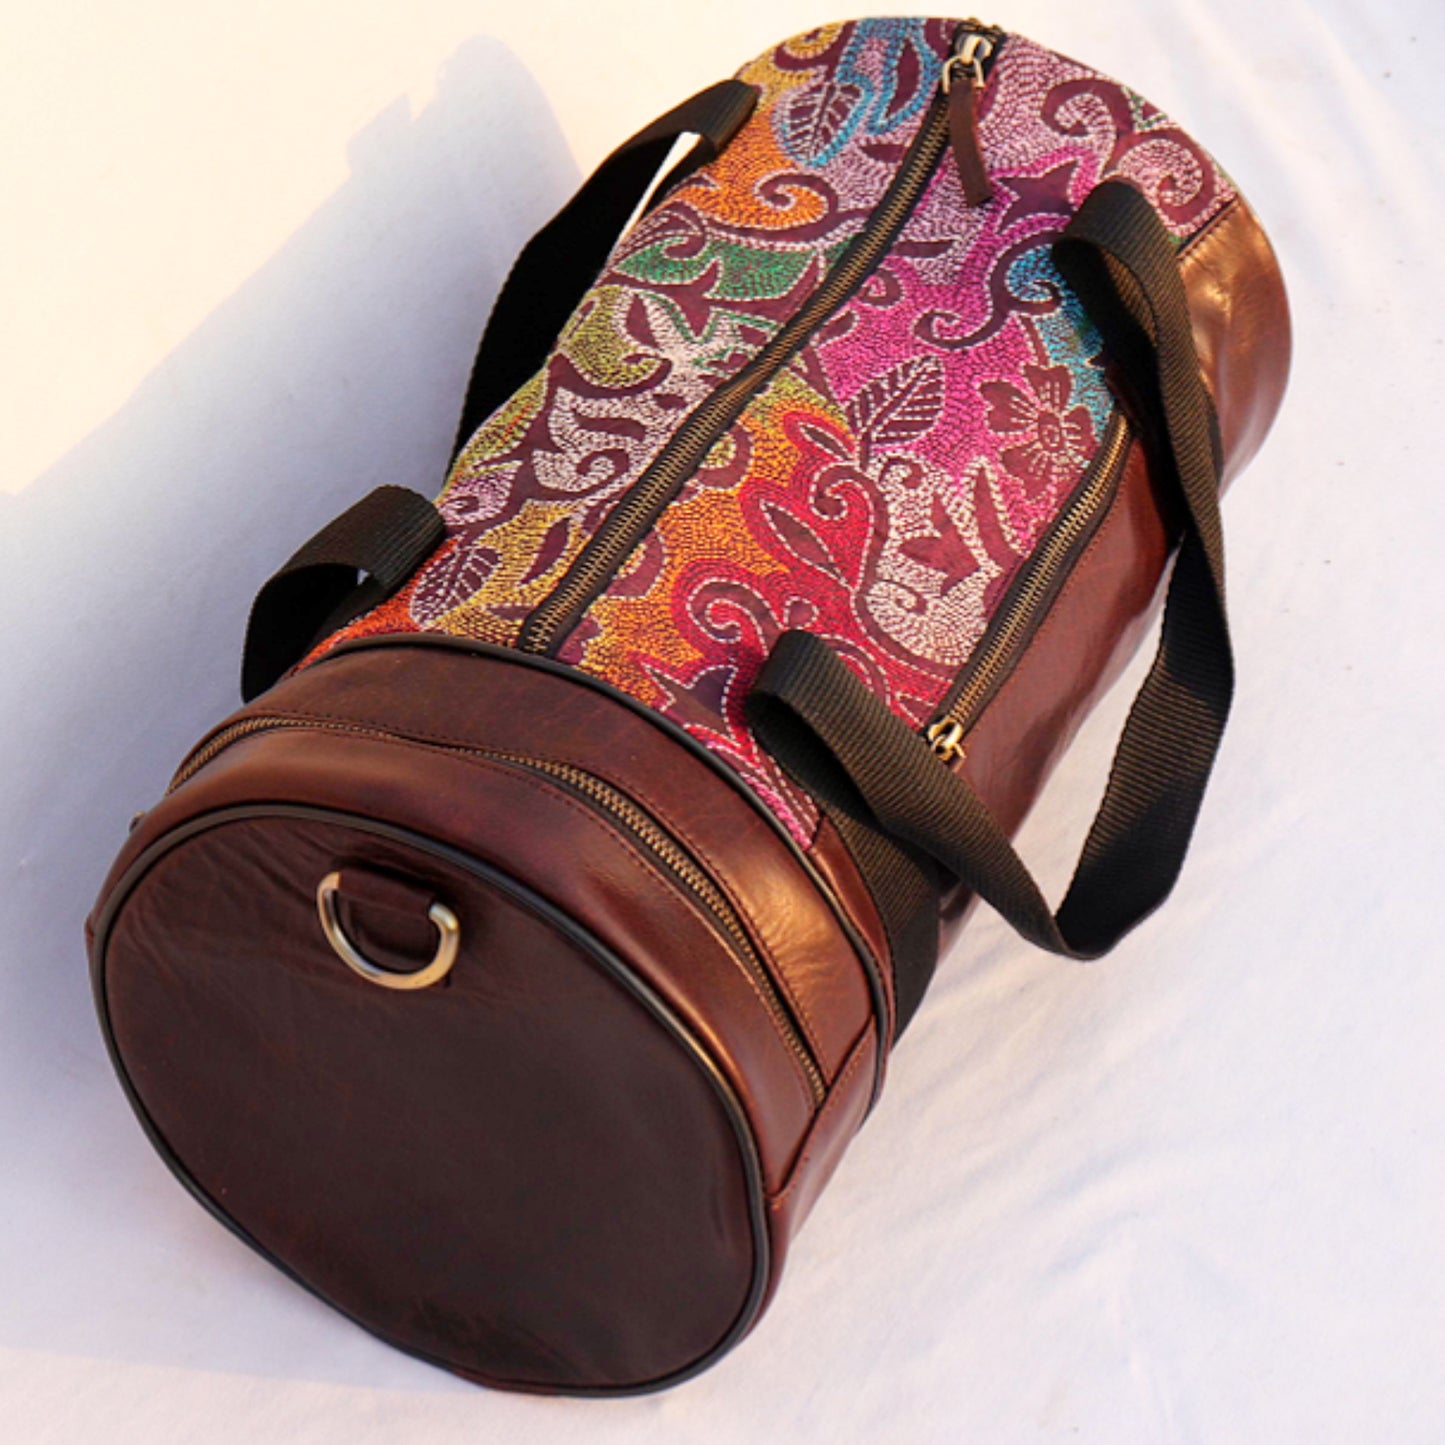 Leather Embroidery Duffle Bag - Dark Brown